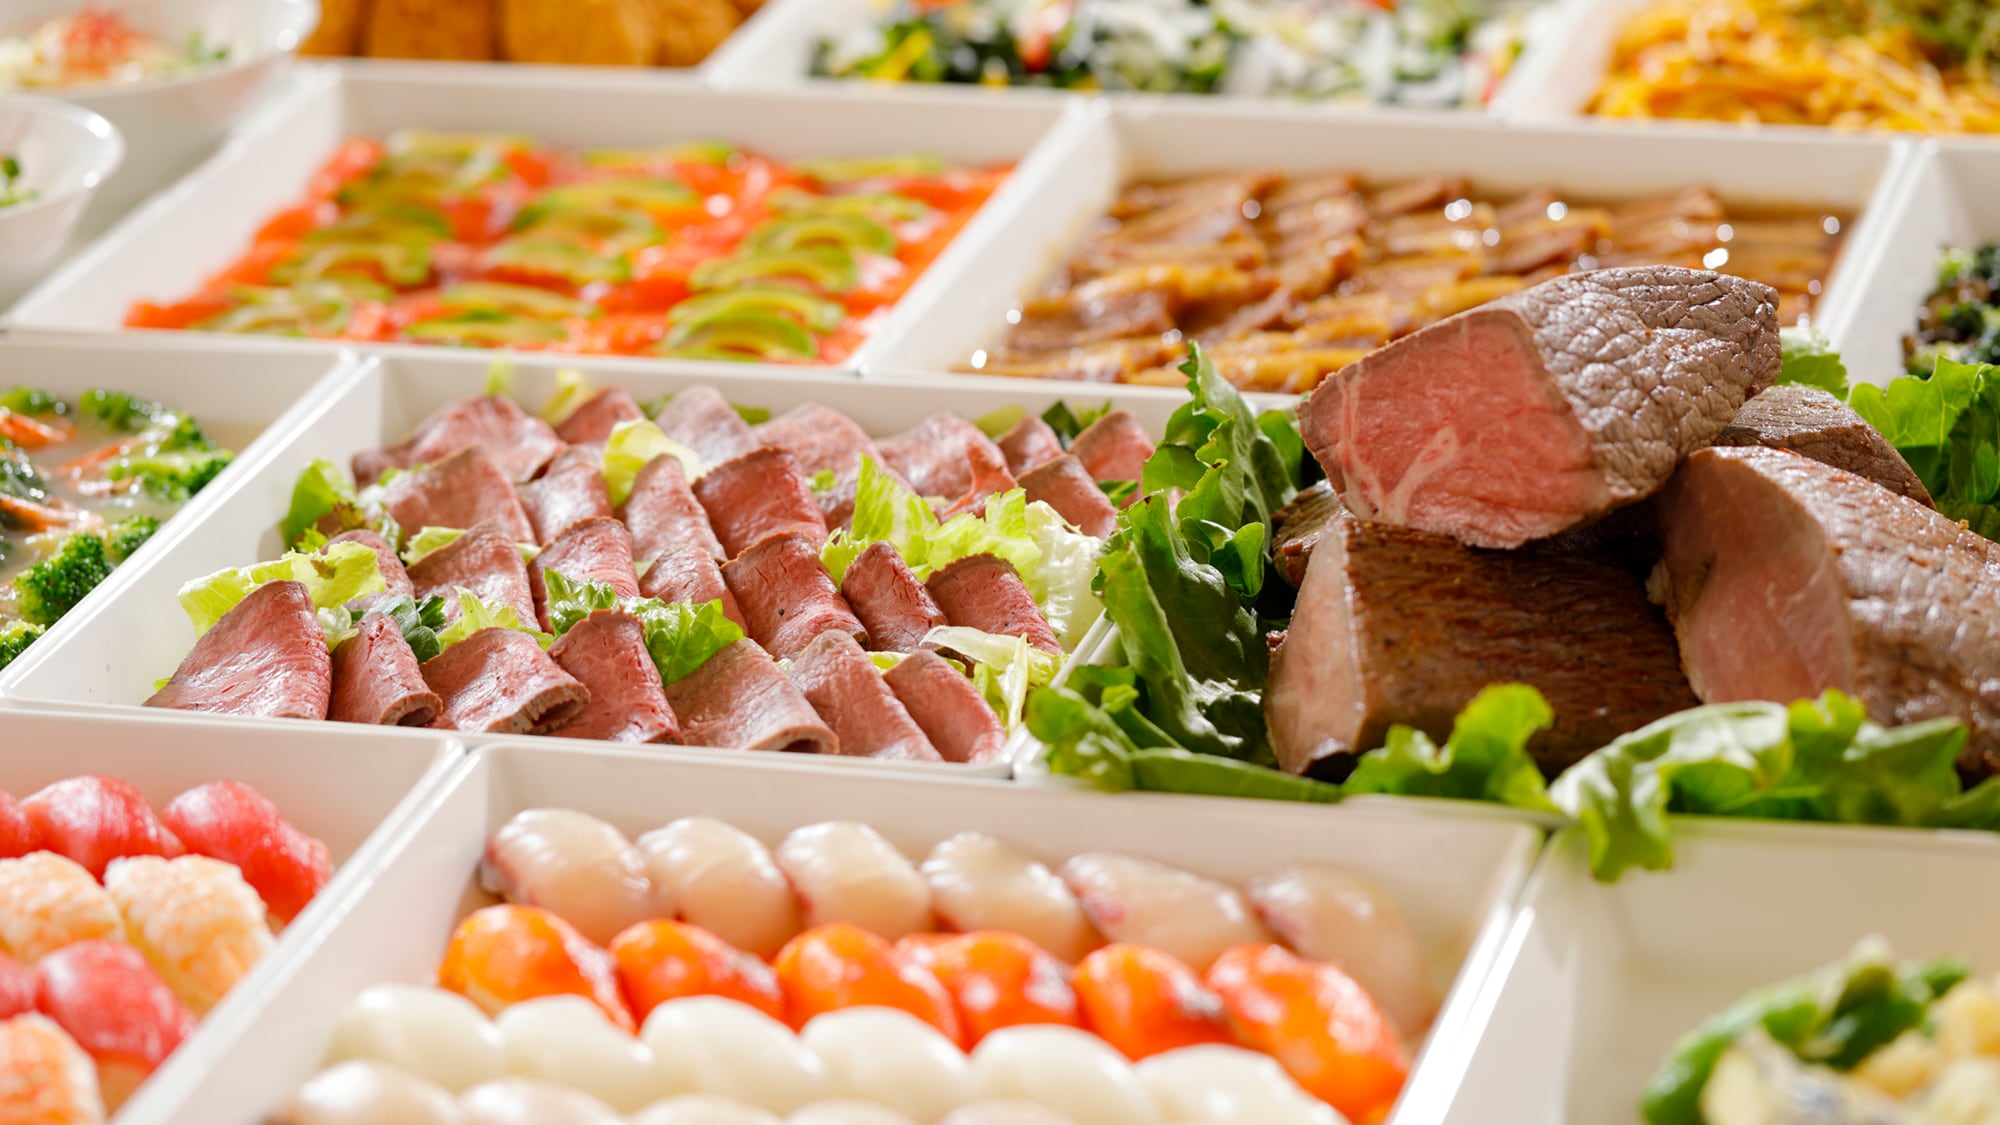 [Dinner Buffet] Live kitchen with chef's skill and buffet style to enjoy the taste of the season